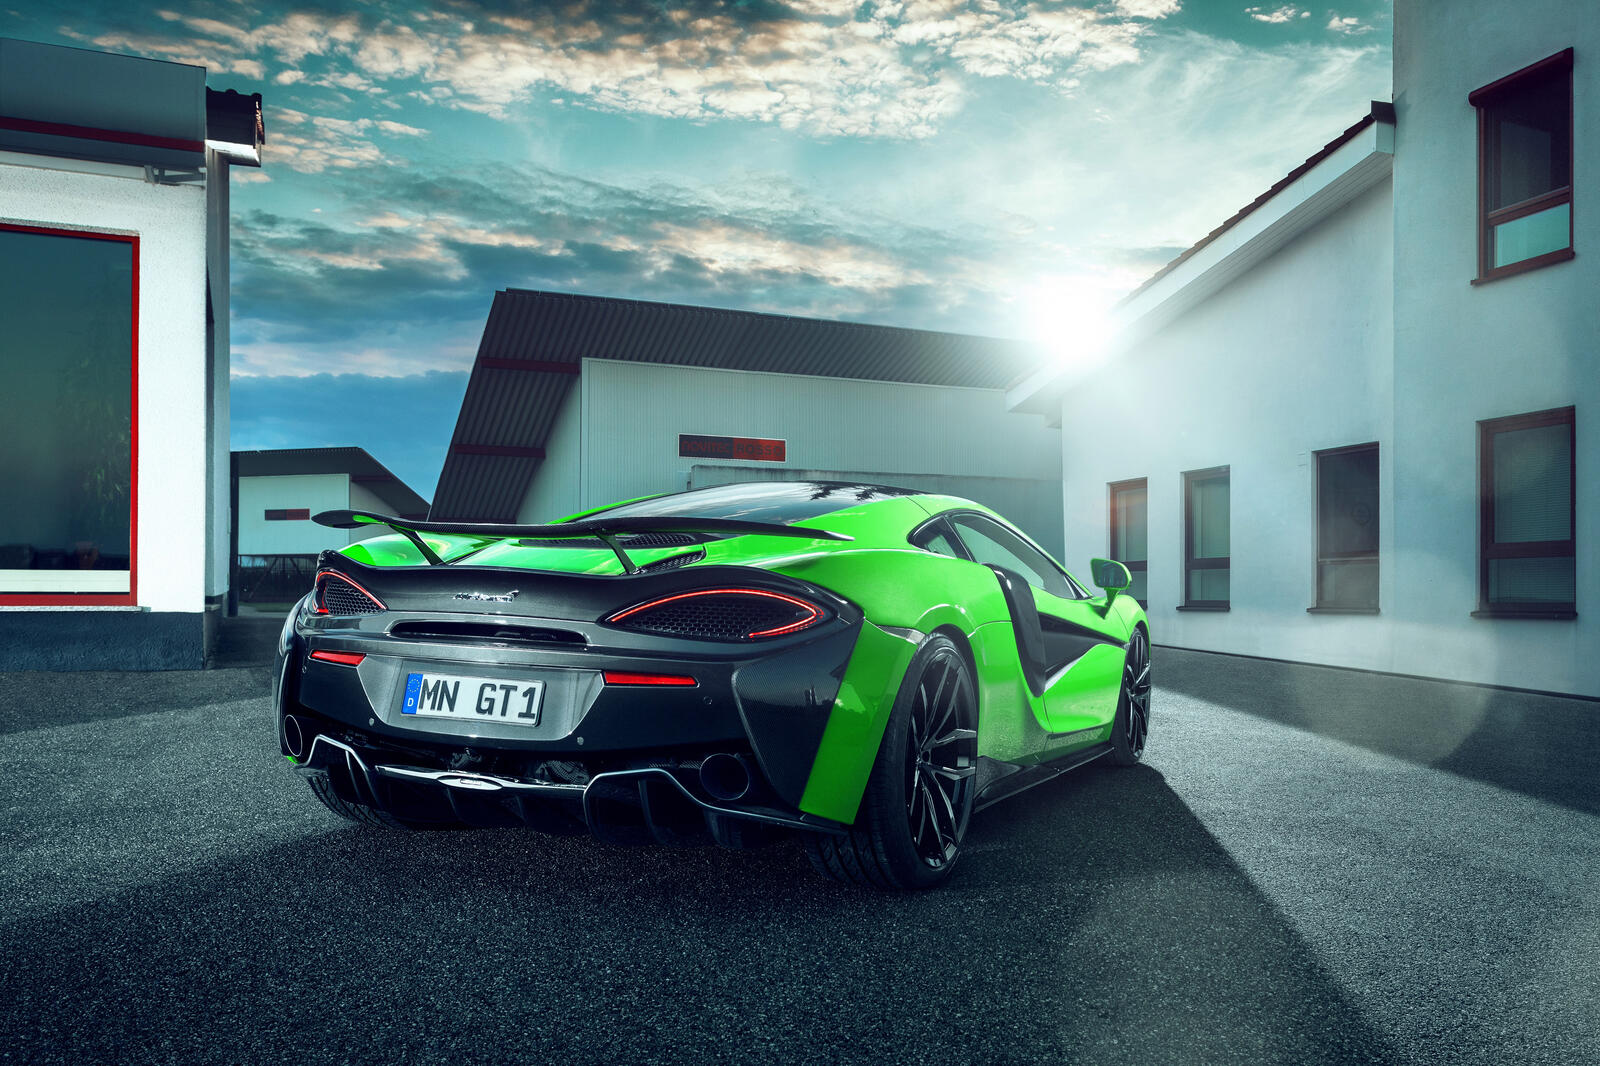 Free photo The rear of the green Mclaren 570GT.